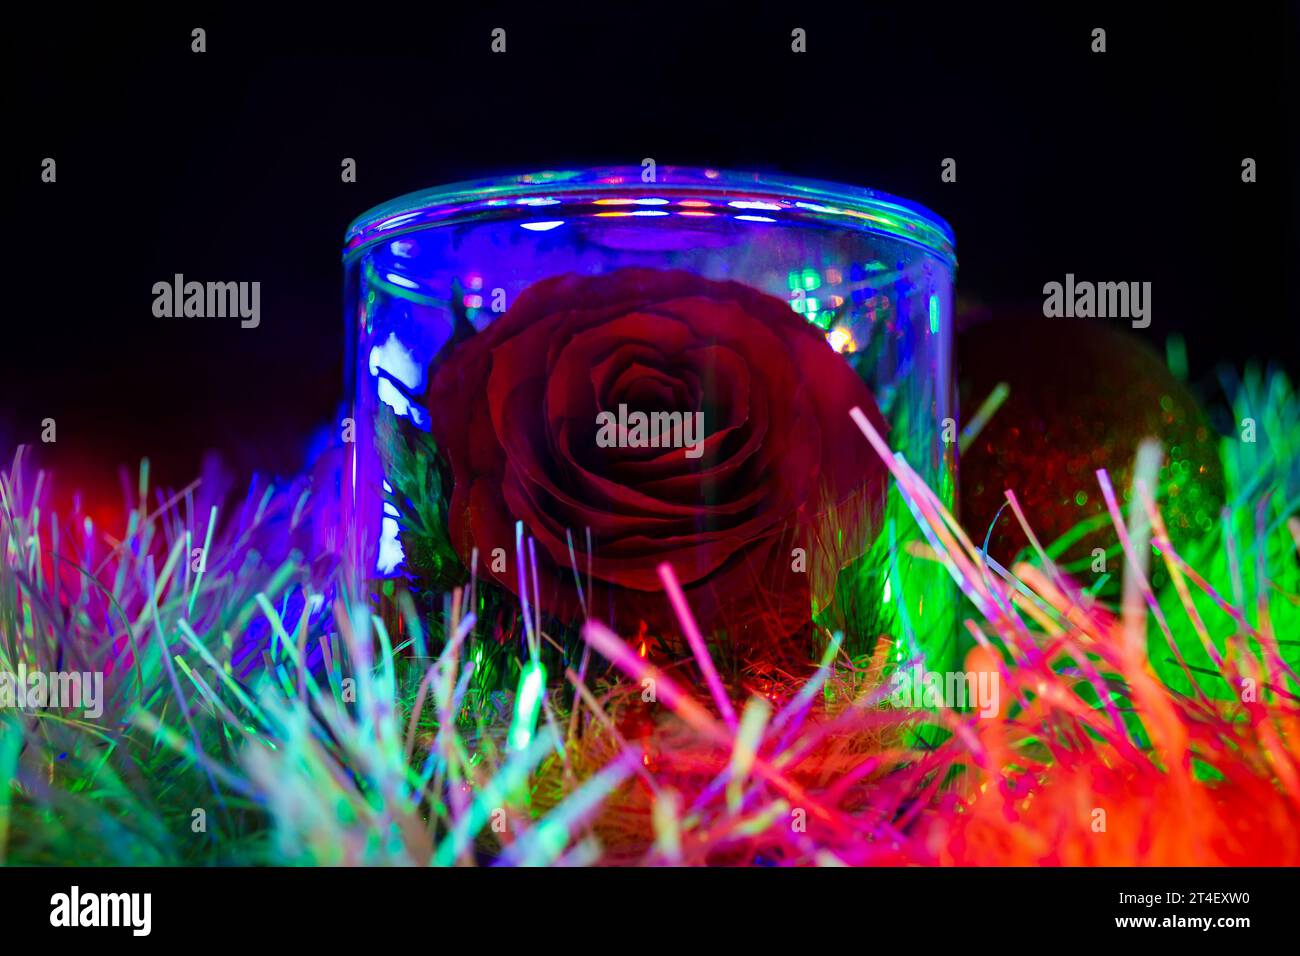 A rose in a jar stands in New Year's tinsel and is illuminated by colorful lights of garlands Stock Photo